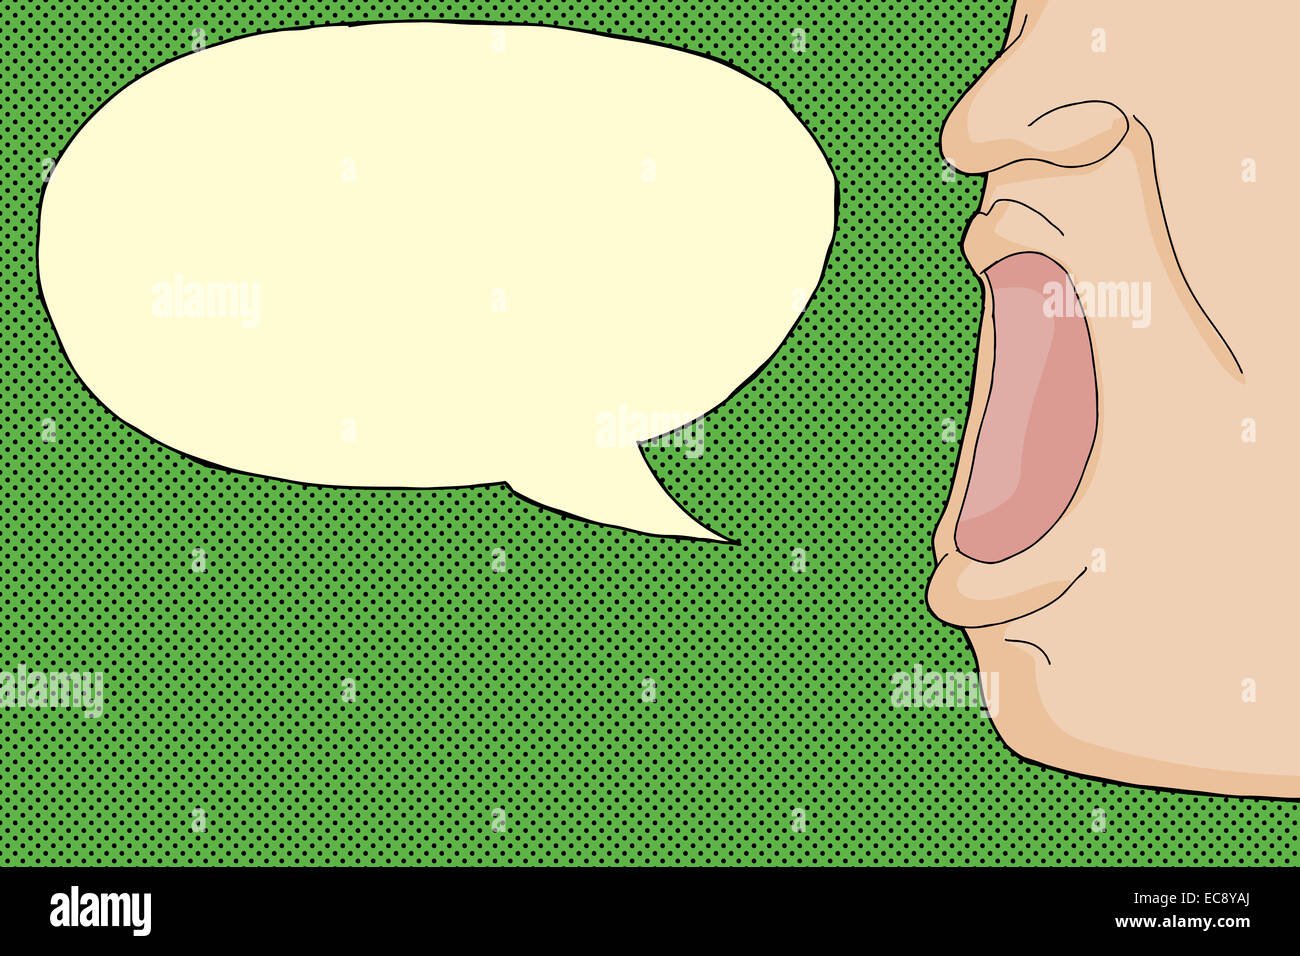 Person yelling with word bubble over green background Stock Photo